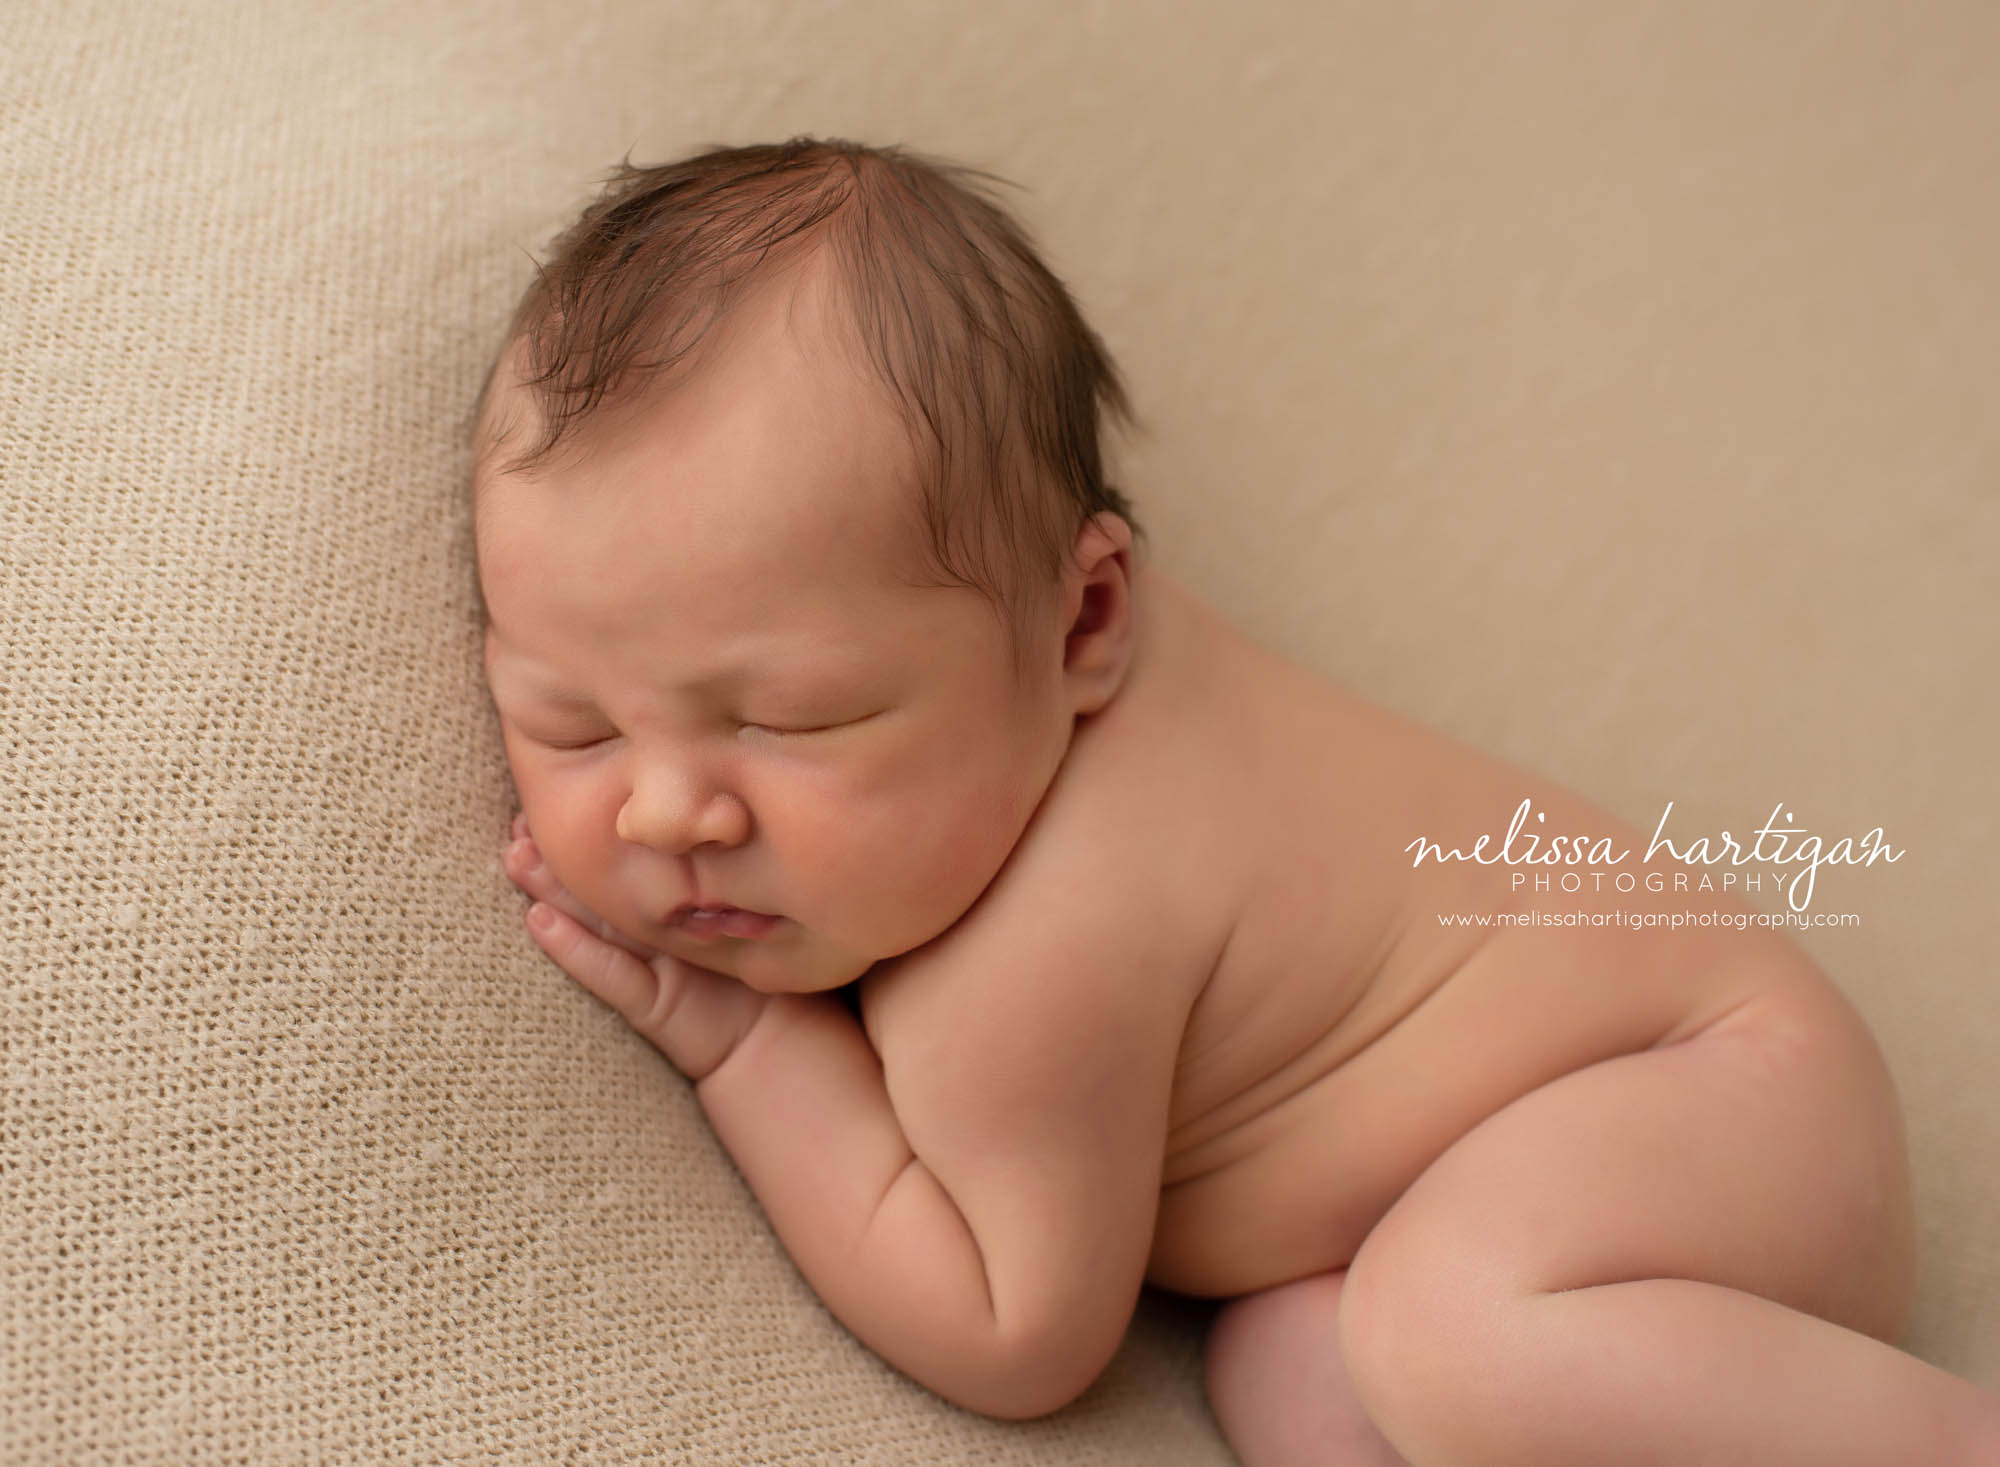 baby boy posed side laying on neutral colored blanket backdro